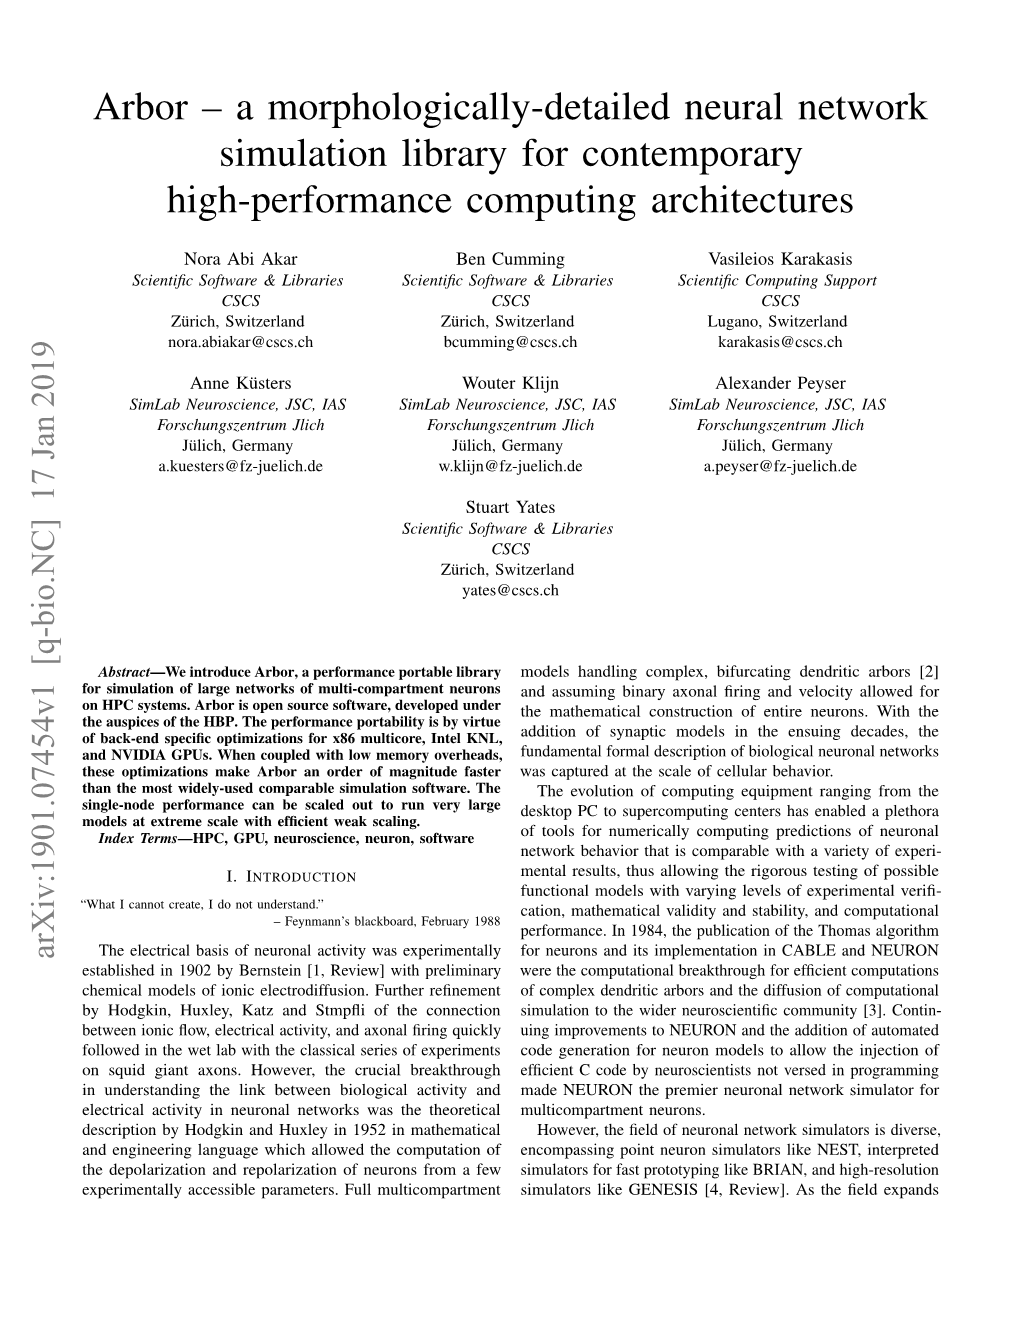 Arbor – a Morphologically-Detailed Neural Network Simulation Library for Contemporary High-Performance Computing Architectures